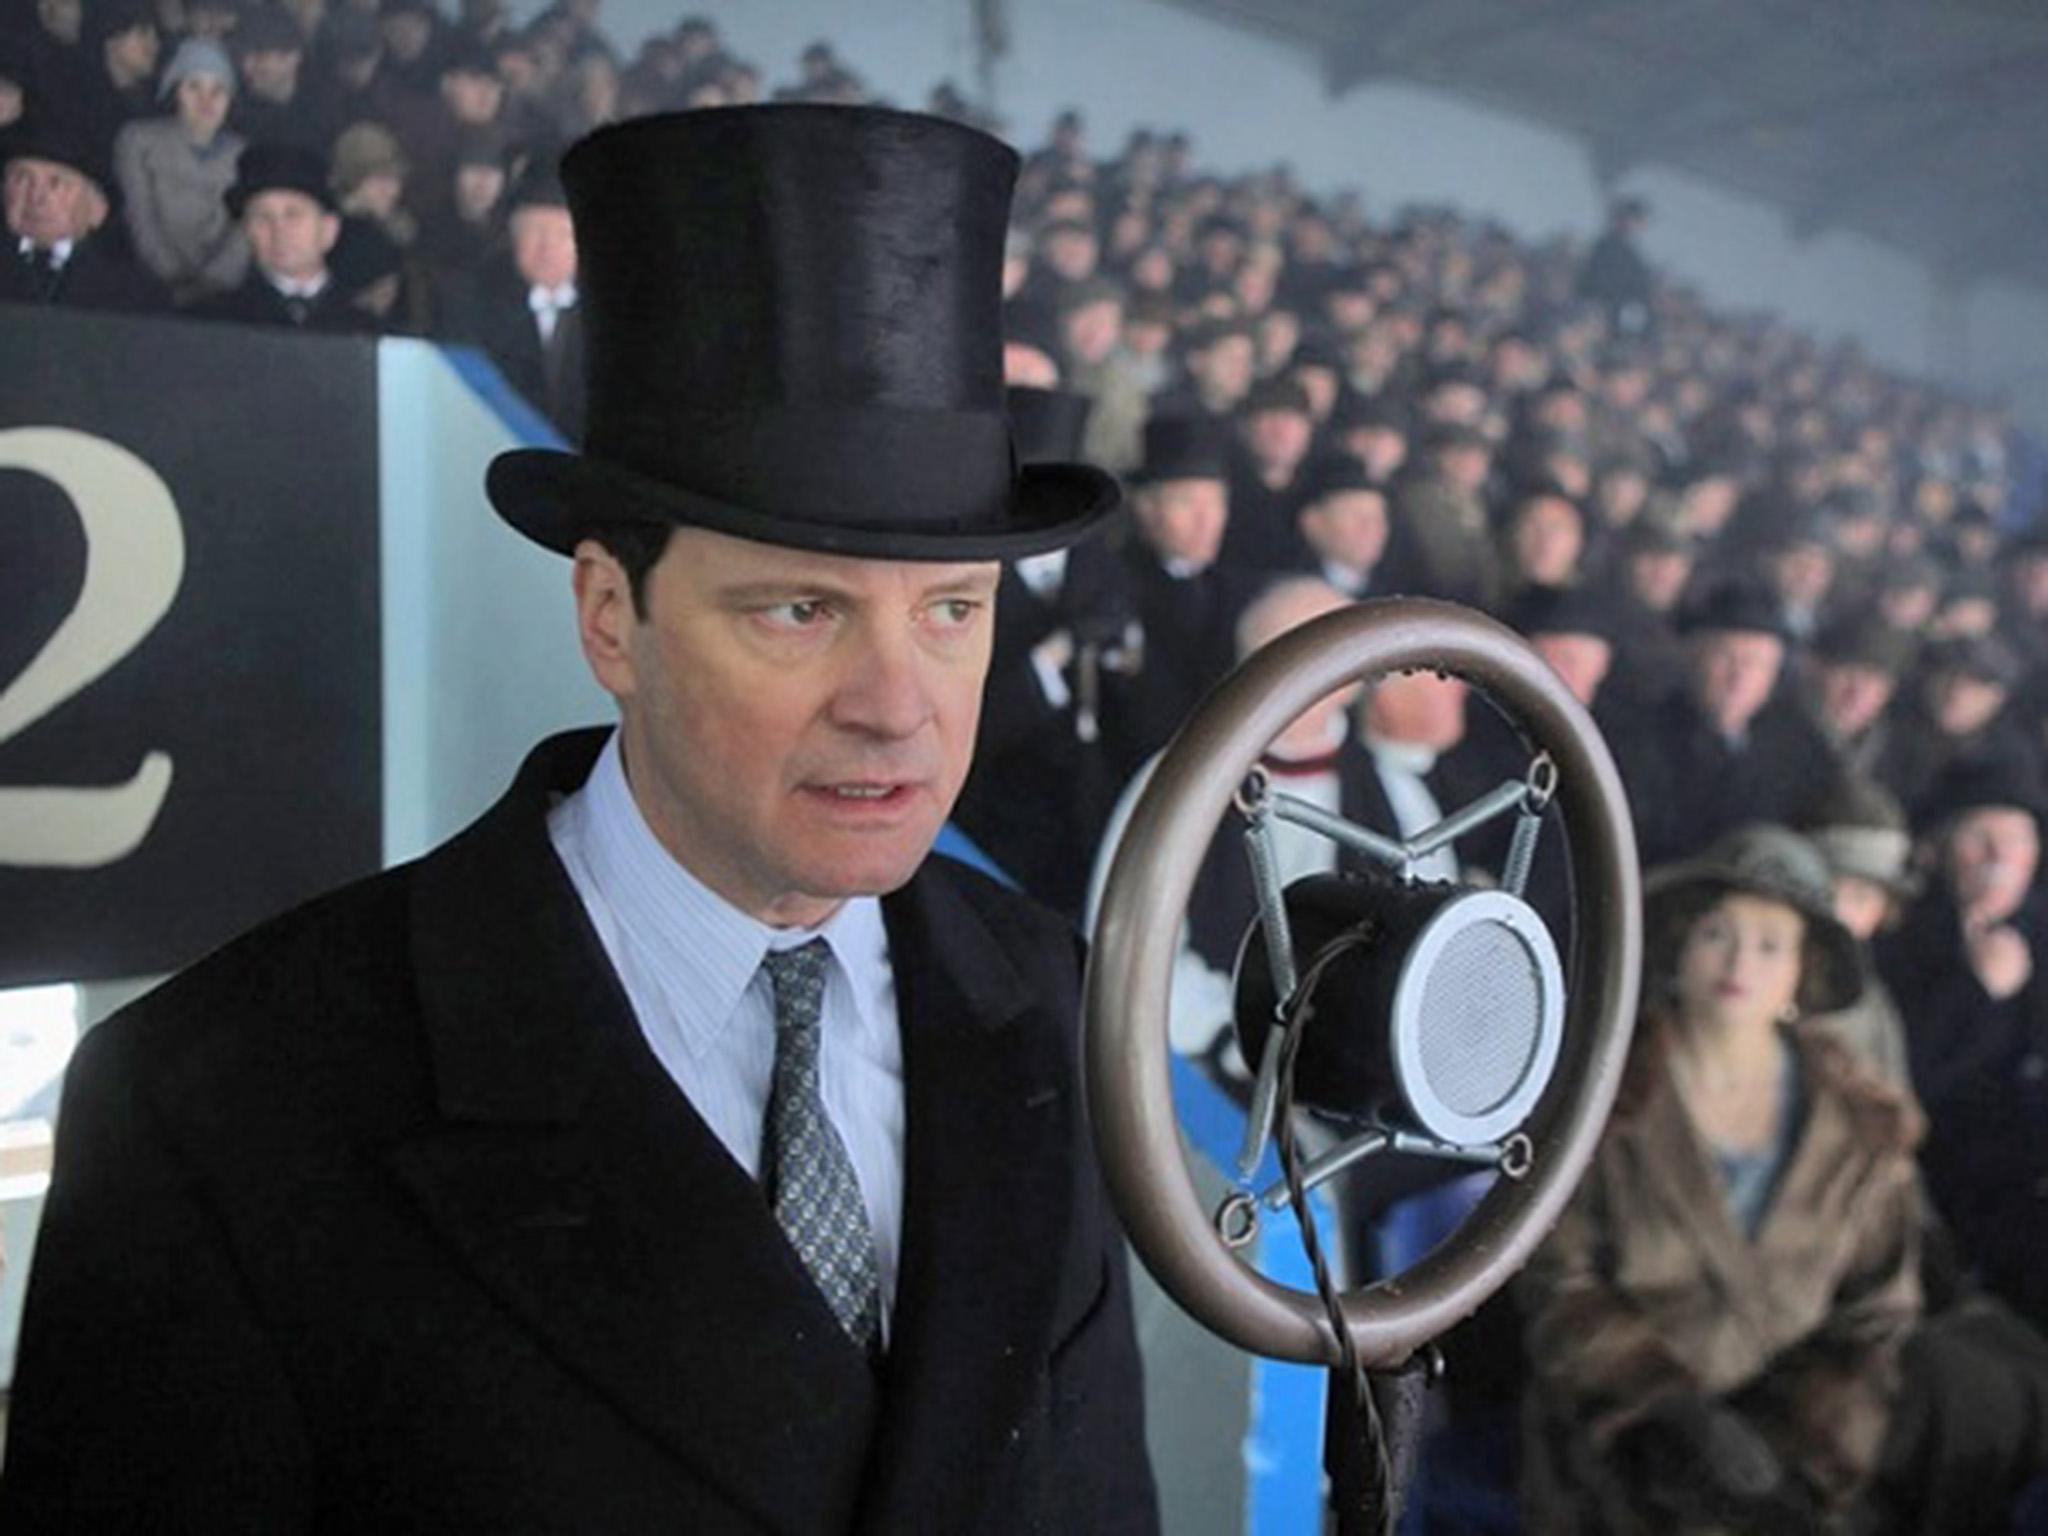 Colin Firth as the stuttering King George VI, or Bertie, in ‘The King’s Speech’